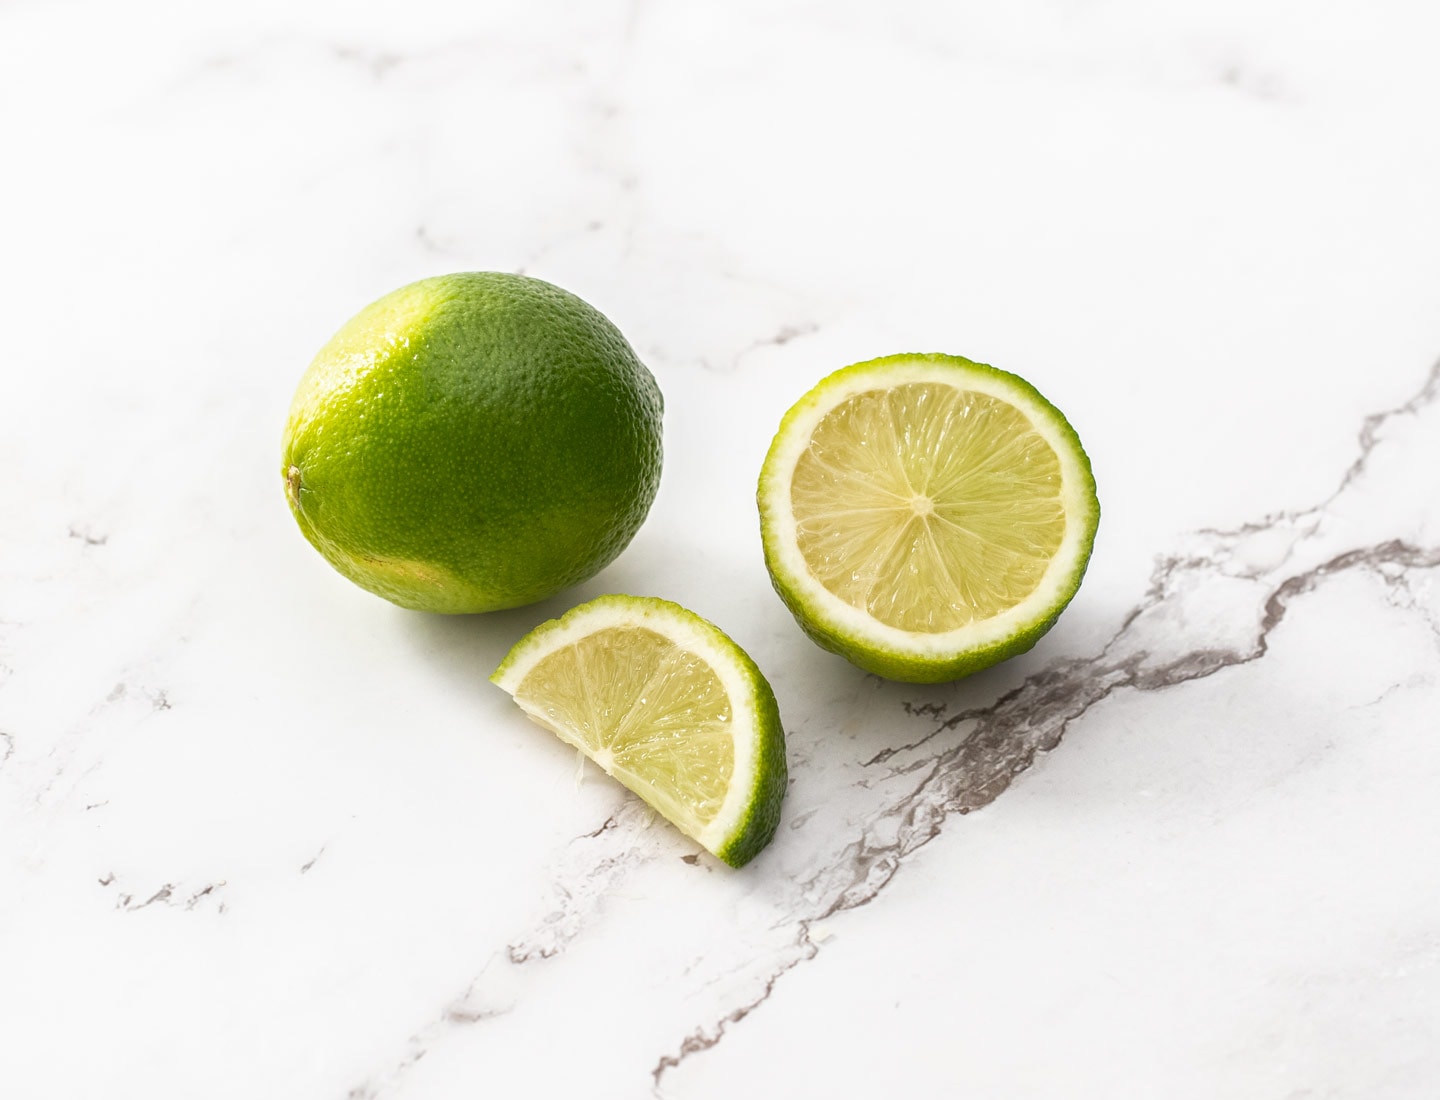 Limes on a marble surface.